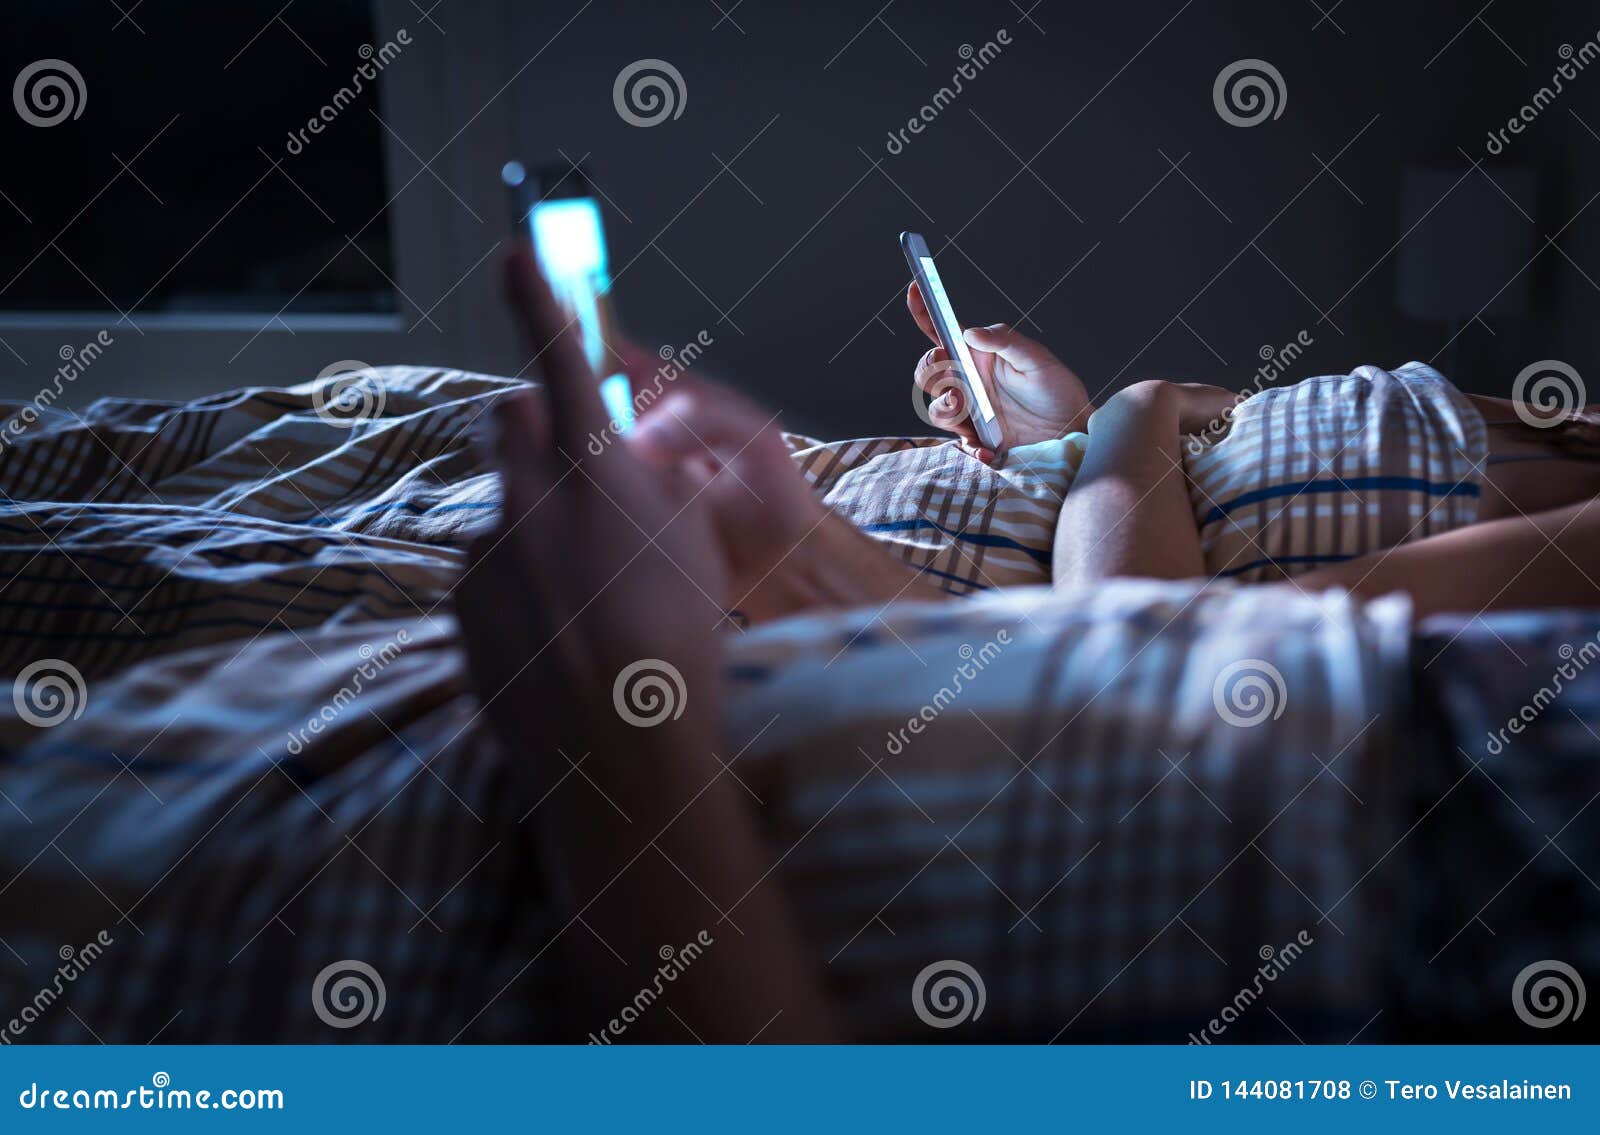 bored distant couple ignoring each other lying in bed at night while using mobile phones. smartphone addict.